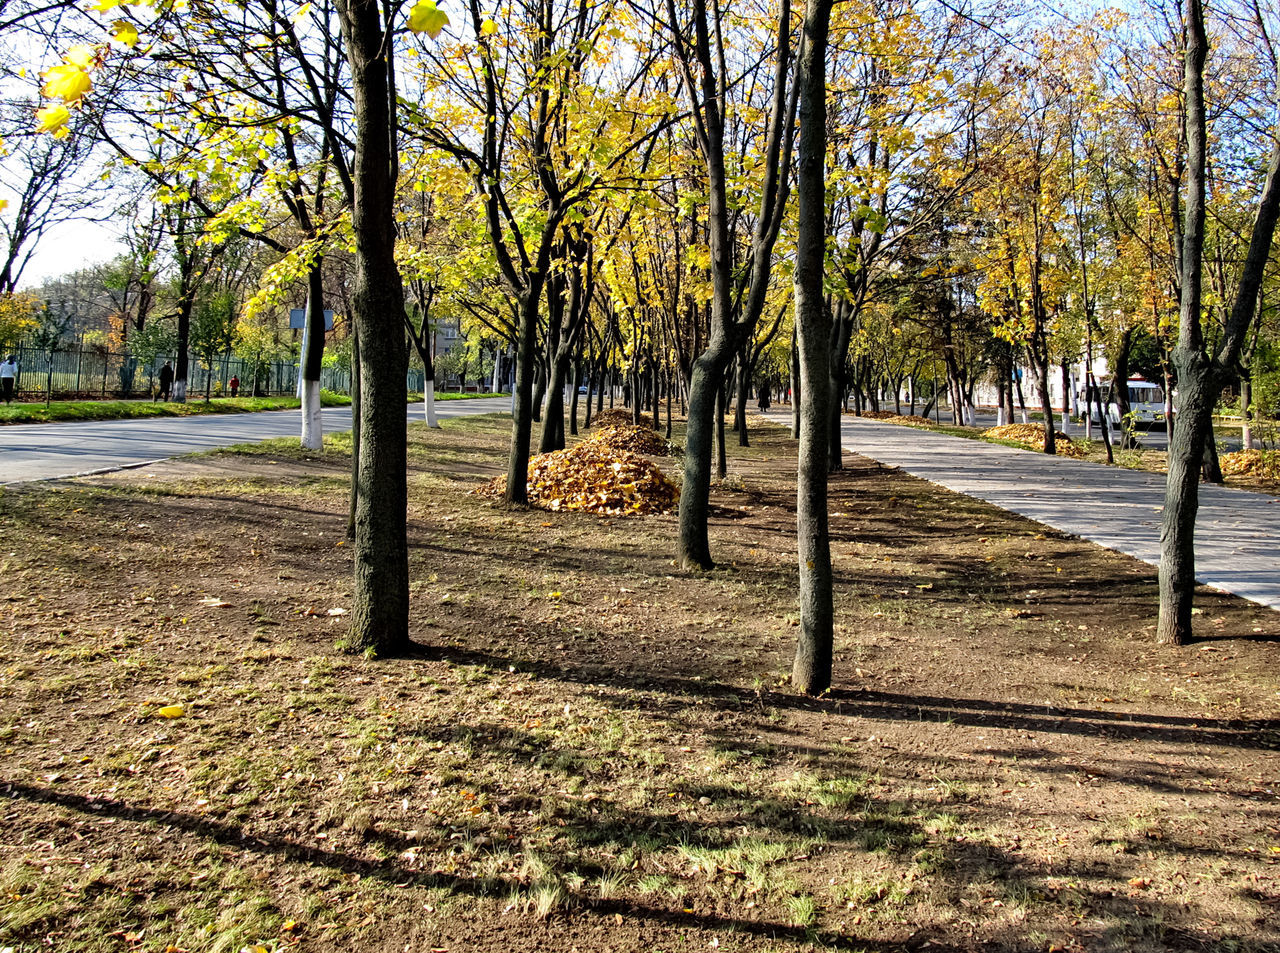 TREES GROWING IN PARK DURING AUTUMN